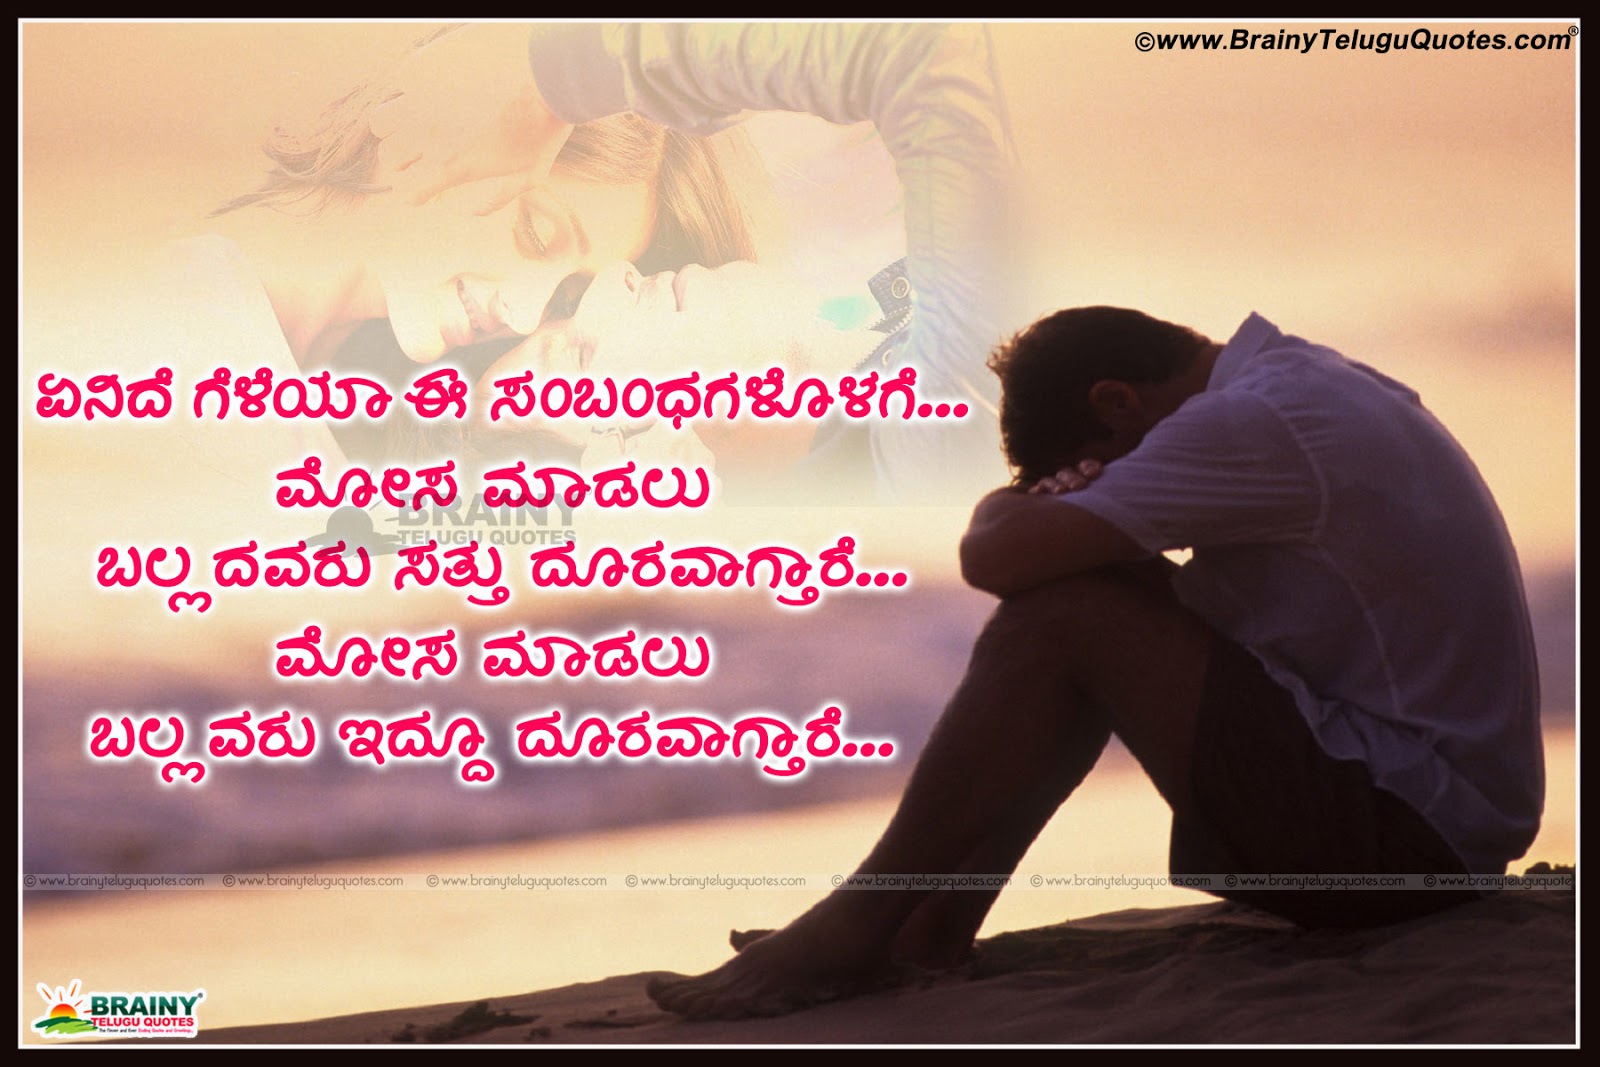 Sad Life Quotes In Kannada Kannada love failure quotes and miss you images